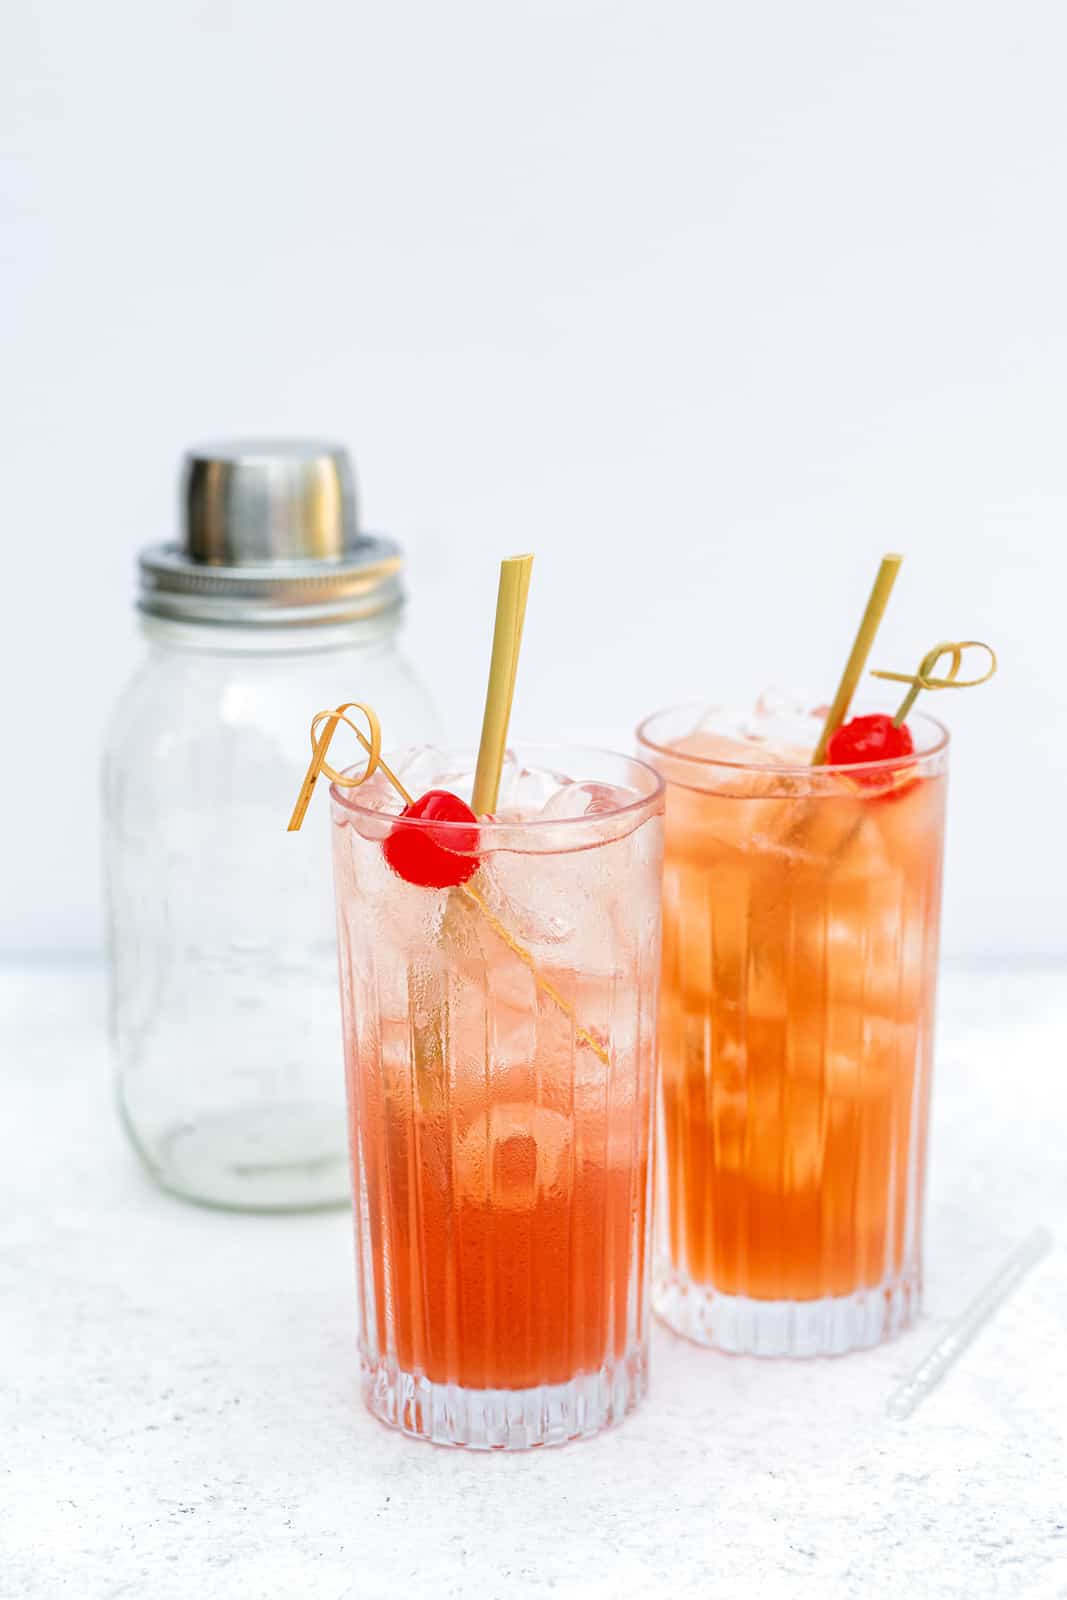 Singapore Sling served in two tall glasses filled with ice, garnished with cocktail cherries and straws